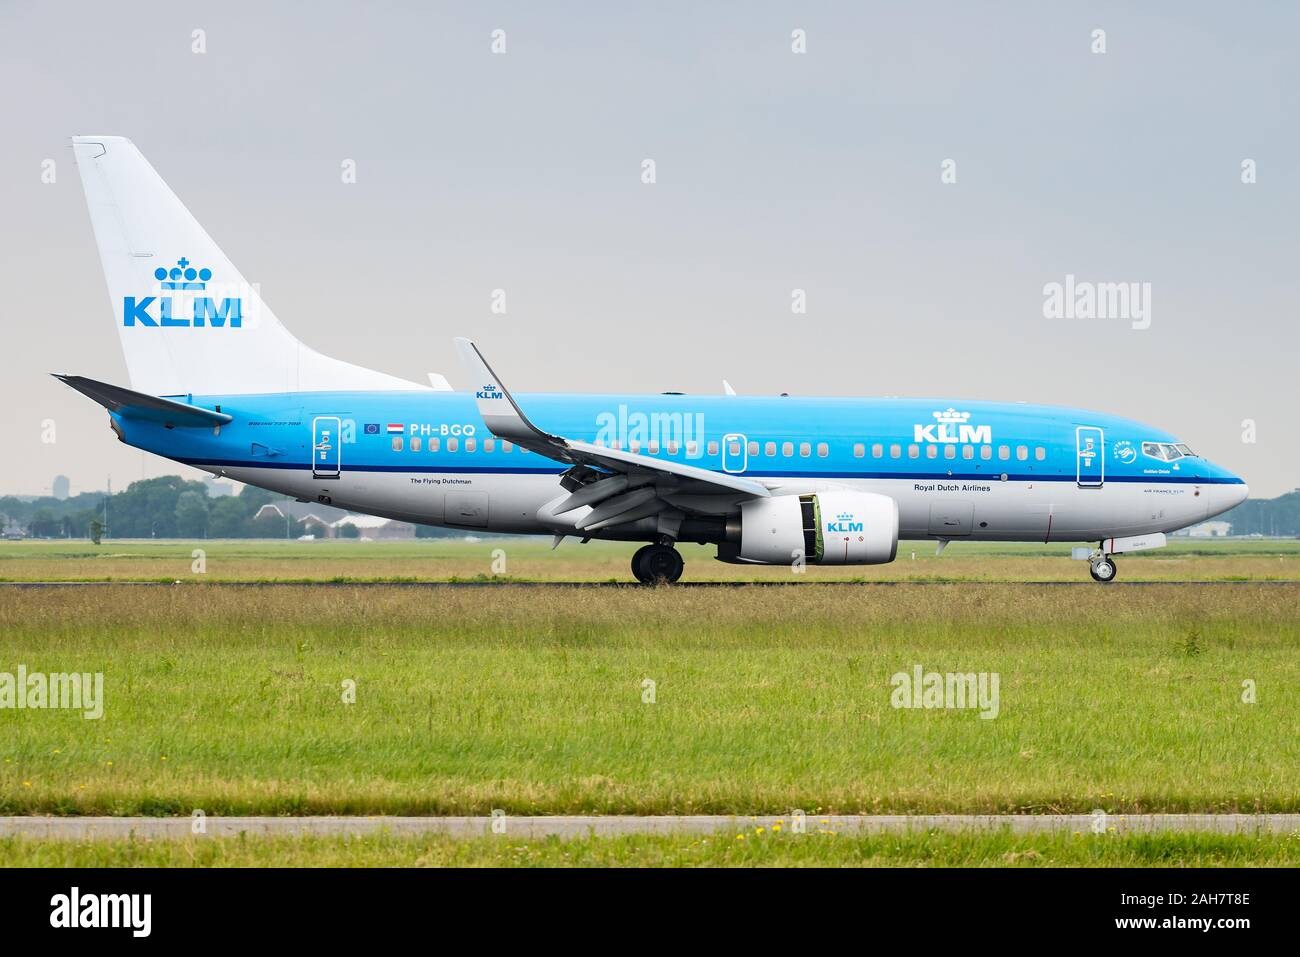 A Boeing 737 passenger aircraft of KLM Royal Dutch Airlines at the Amsterdam Airport Schiphol. Stock Photo